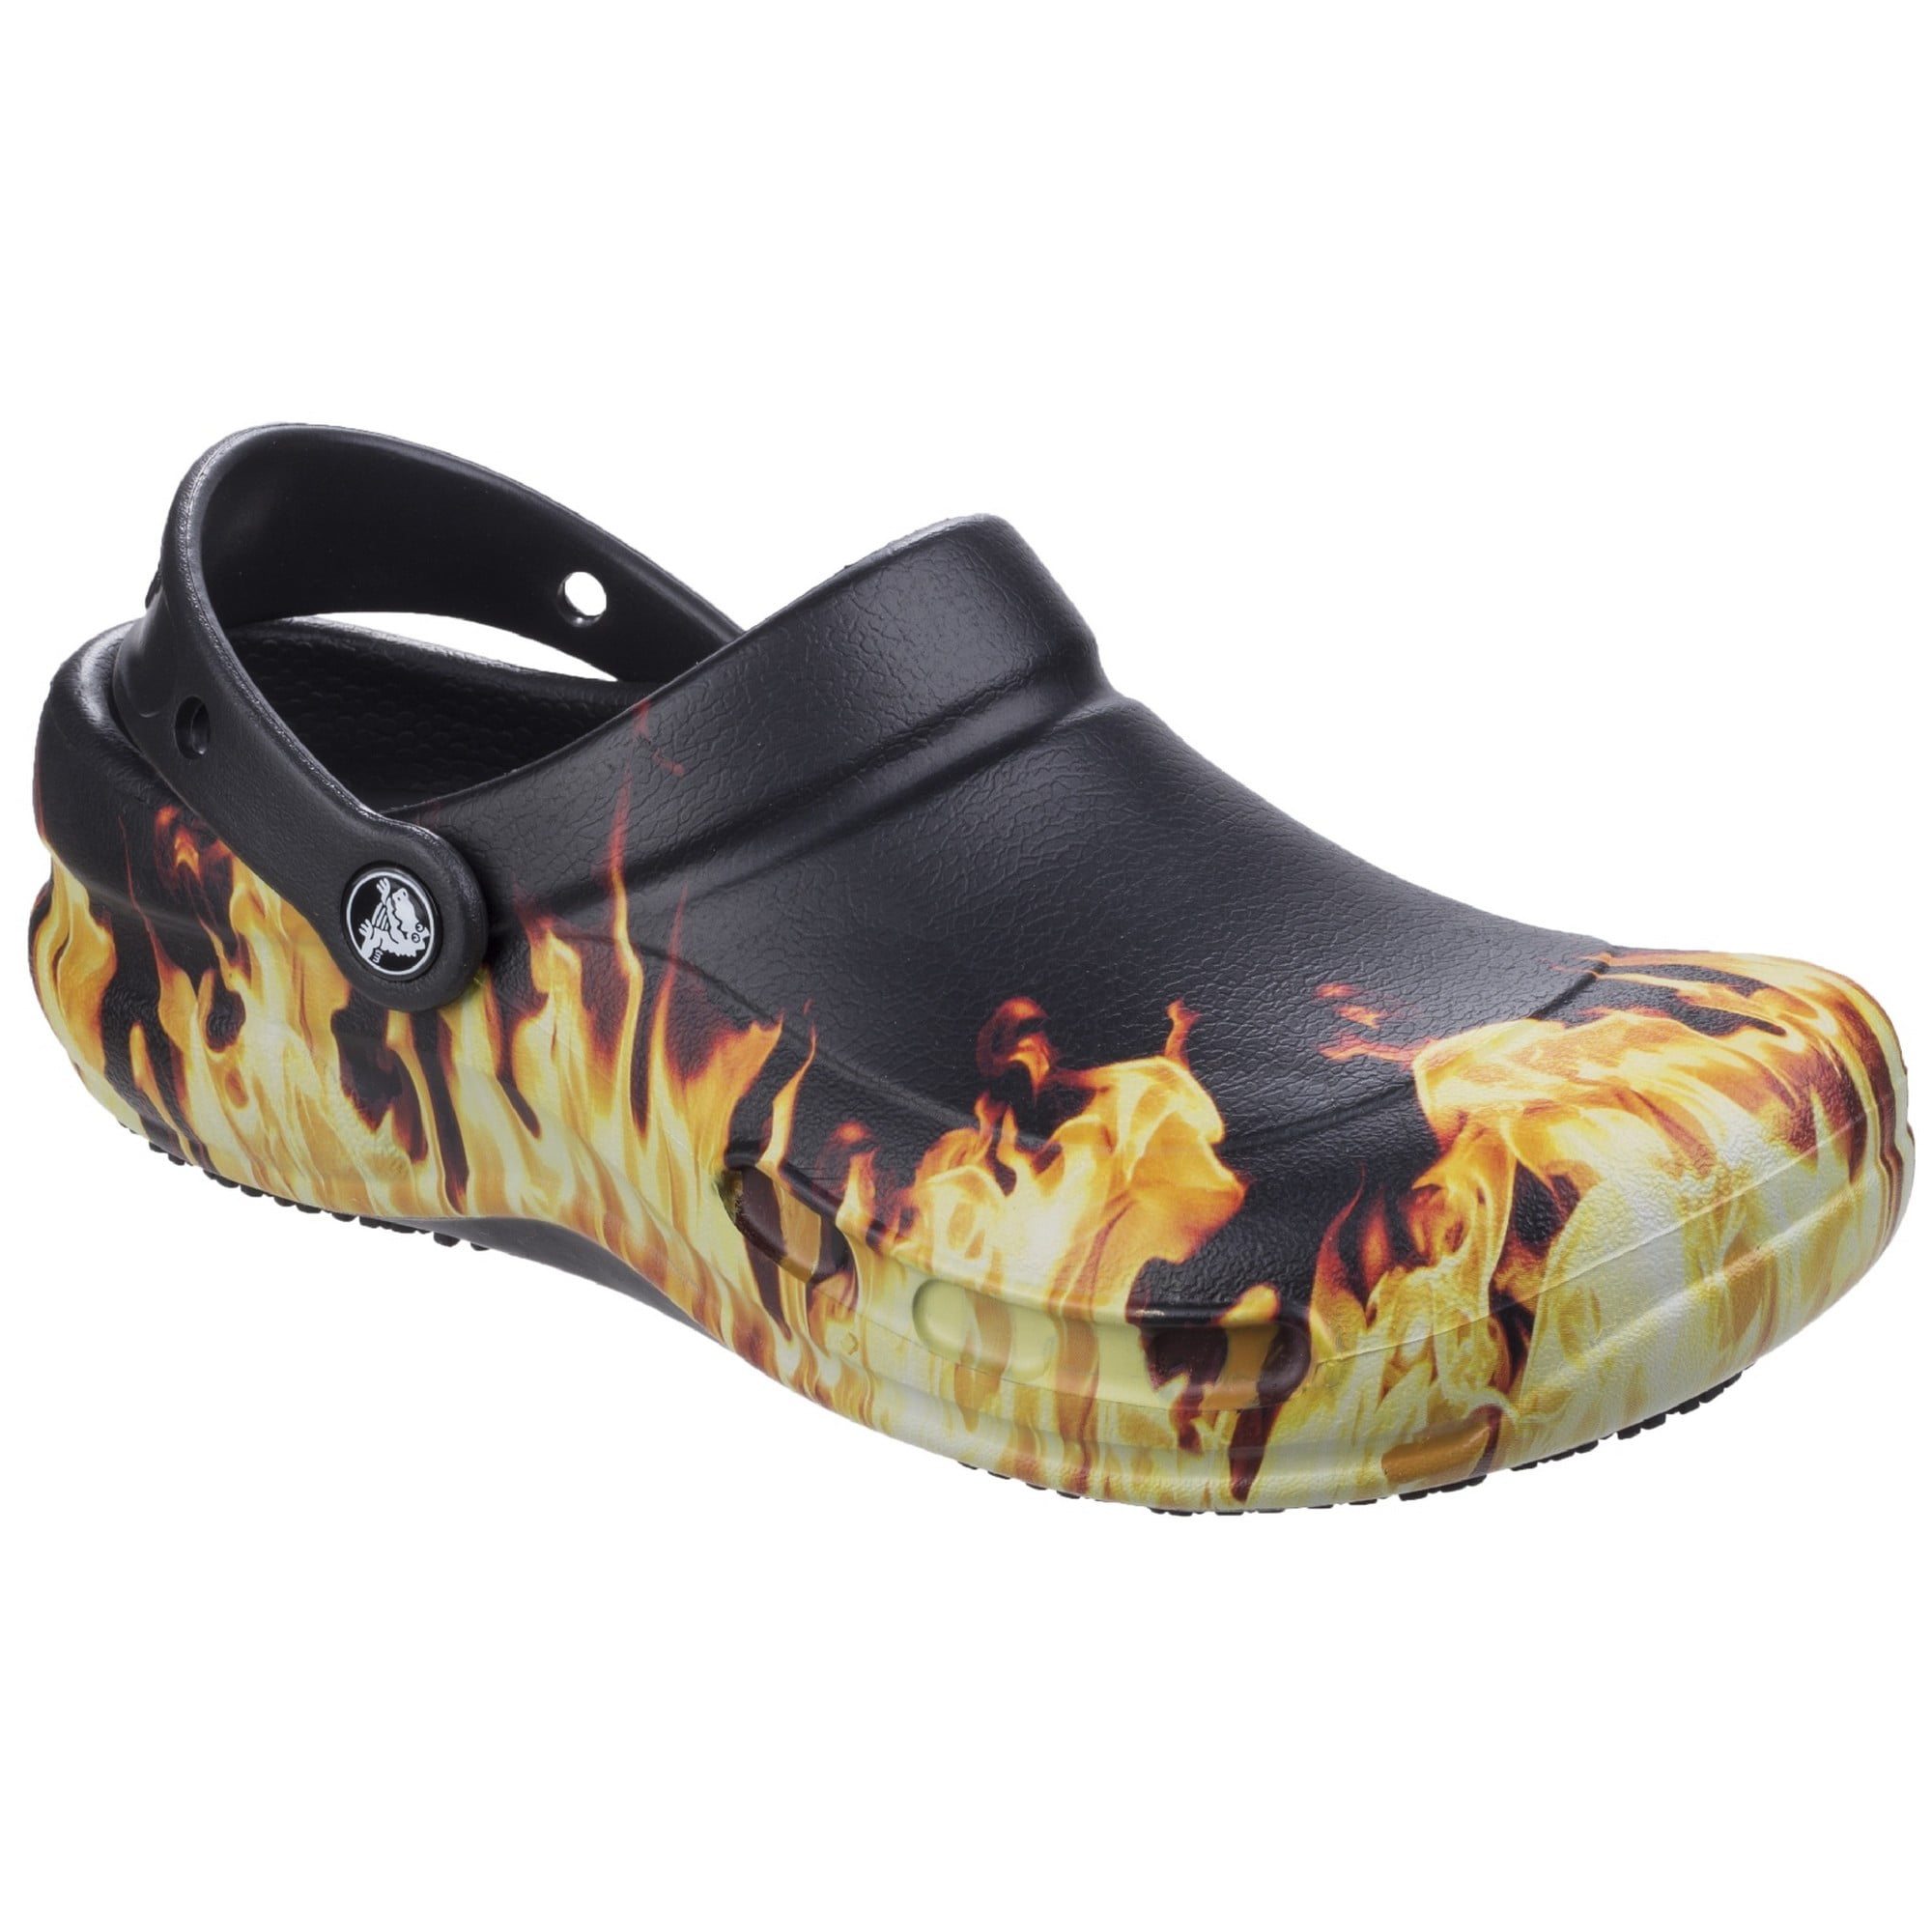 flame crocs with holes